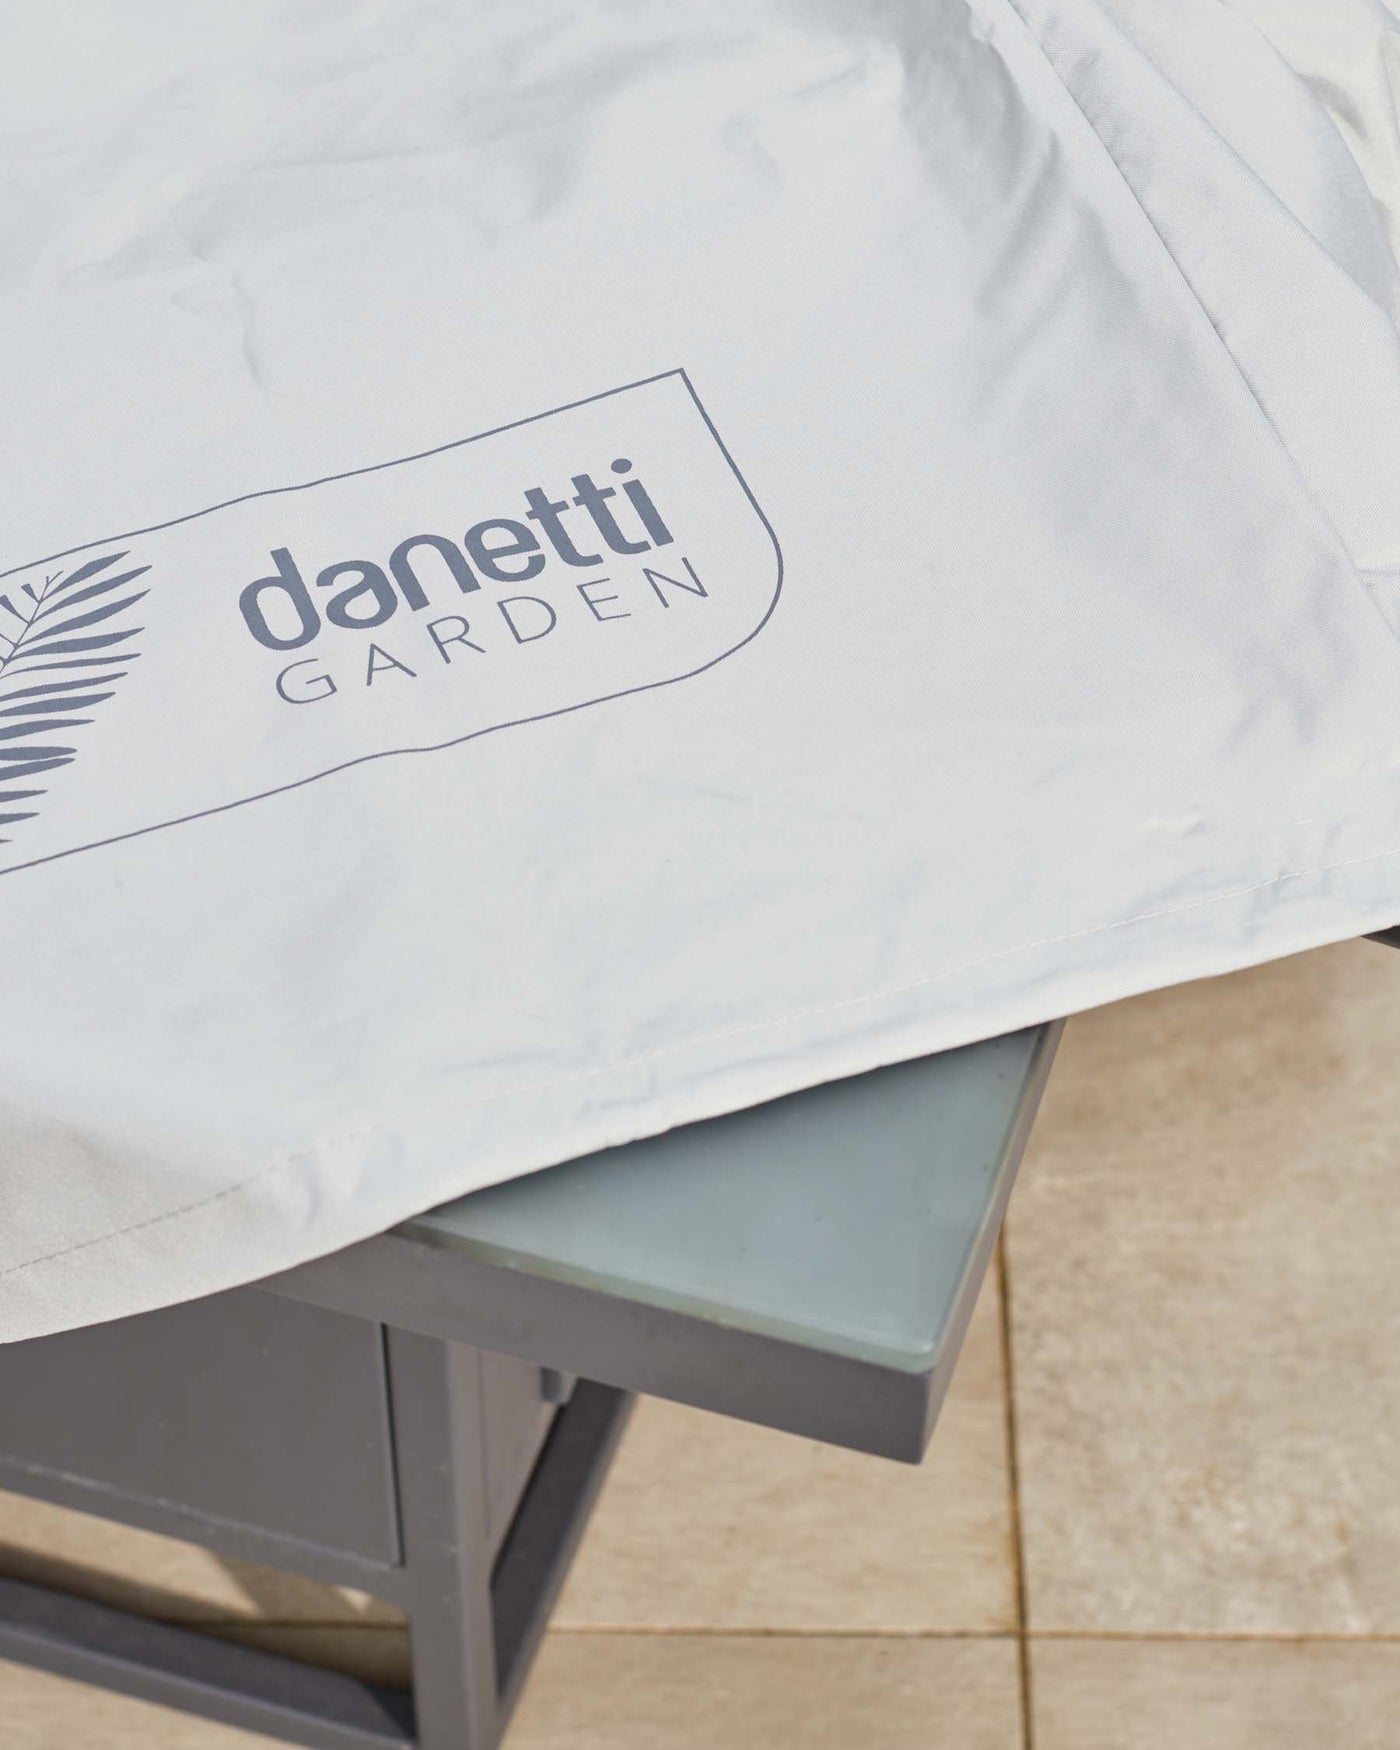 Close-up of a contemporary garden furniture set featuring a grey powder-coated aluminium table with a frosted glass tabletop and a white cushion with 'Danetti Garden' branding.